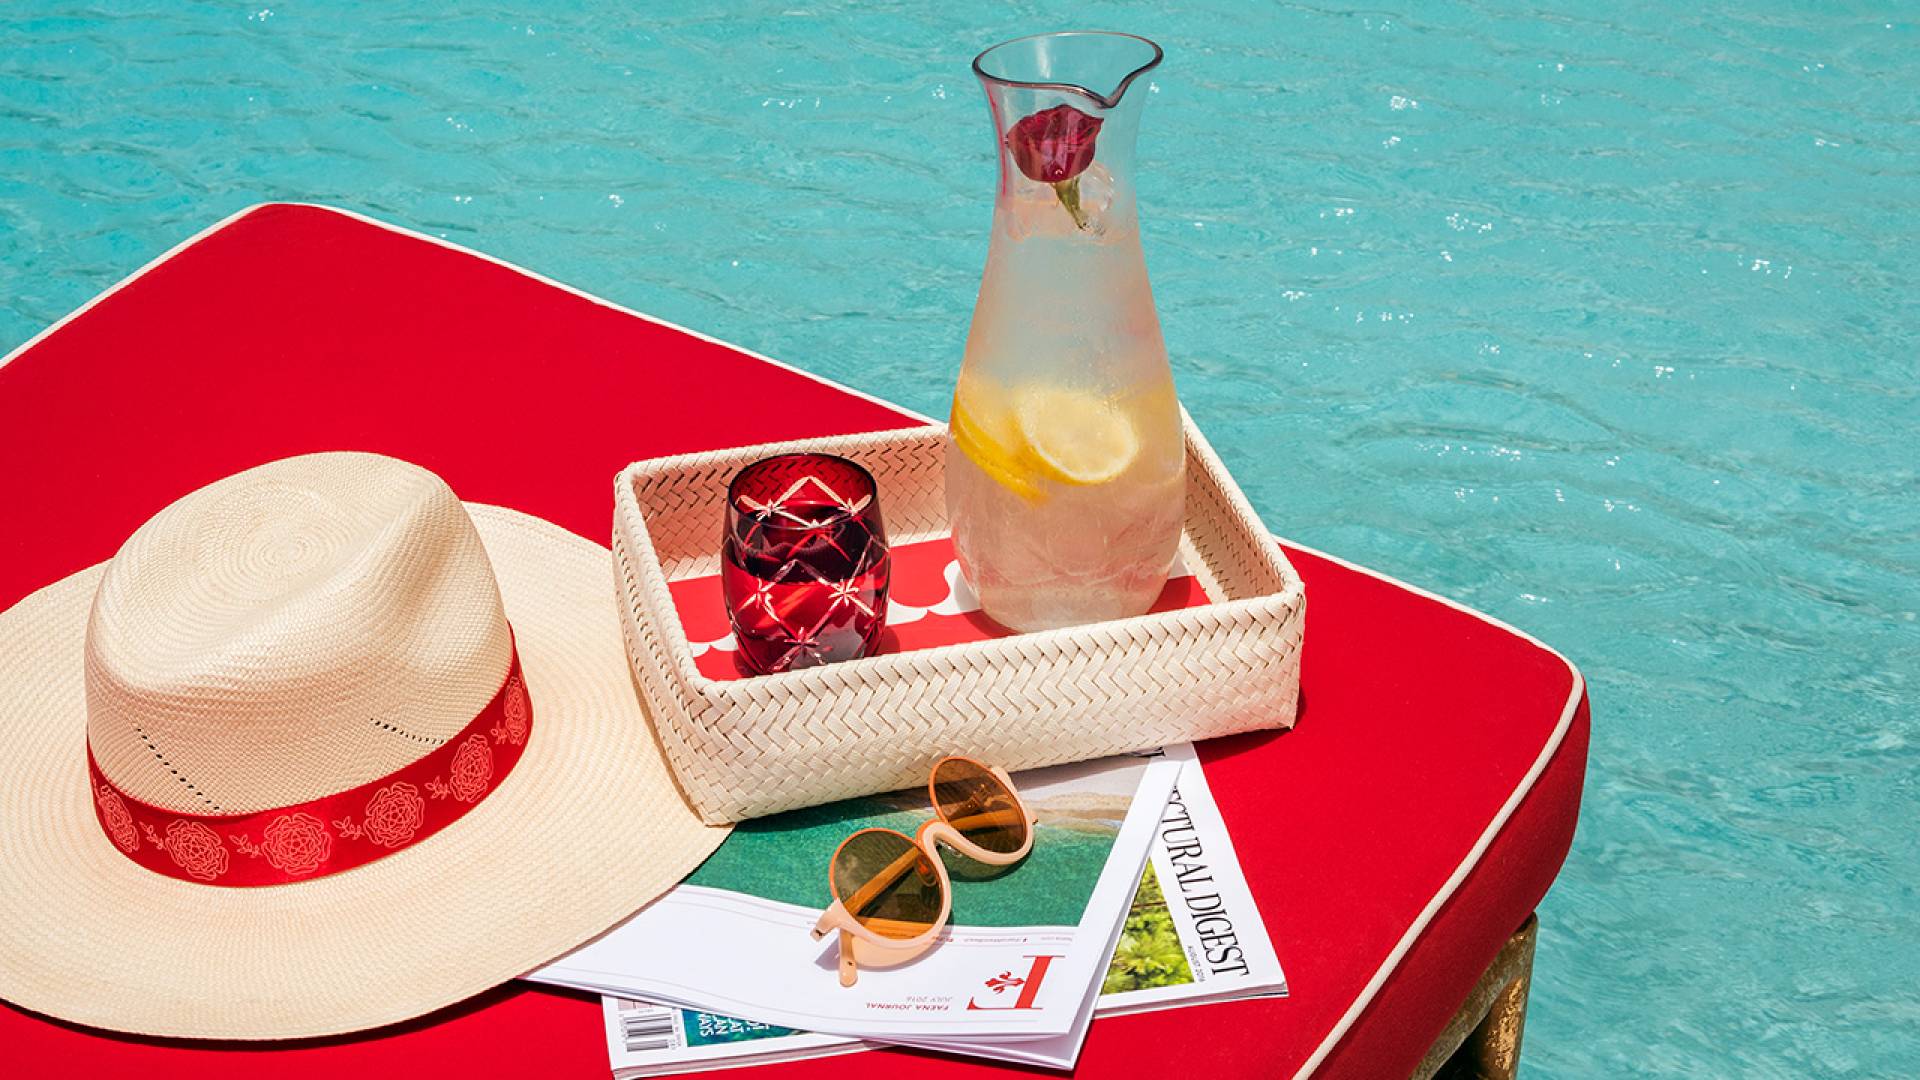 table next to pool with lemonade and a hat